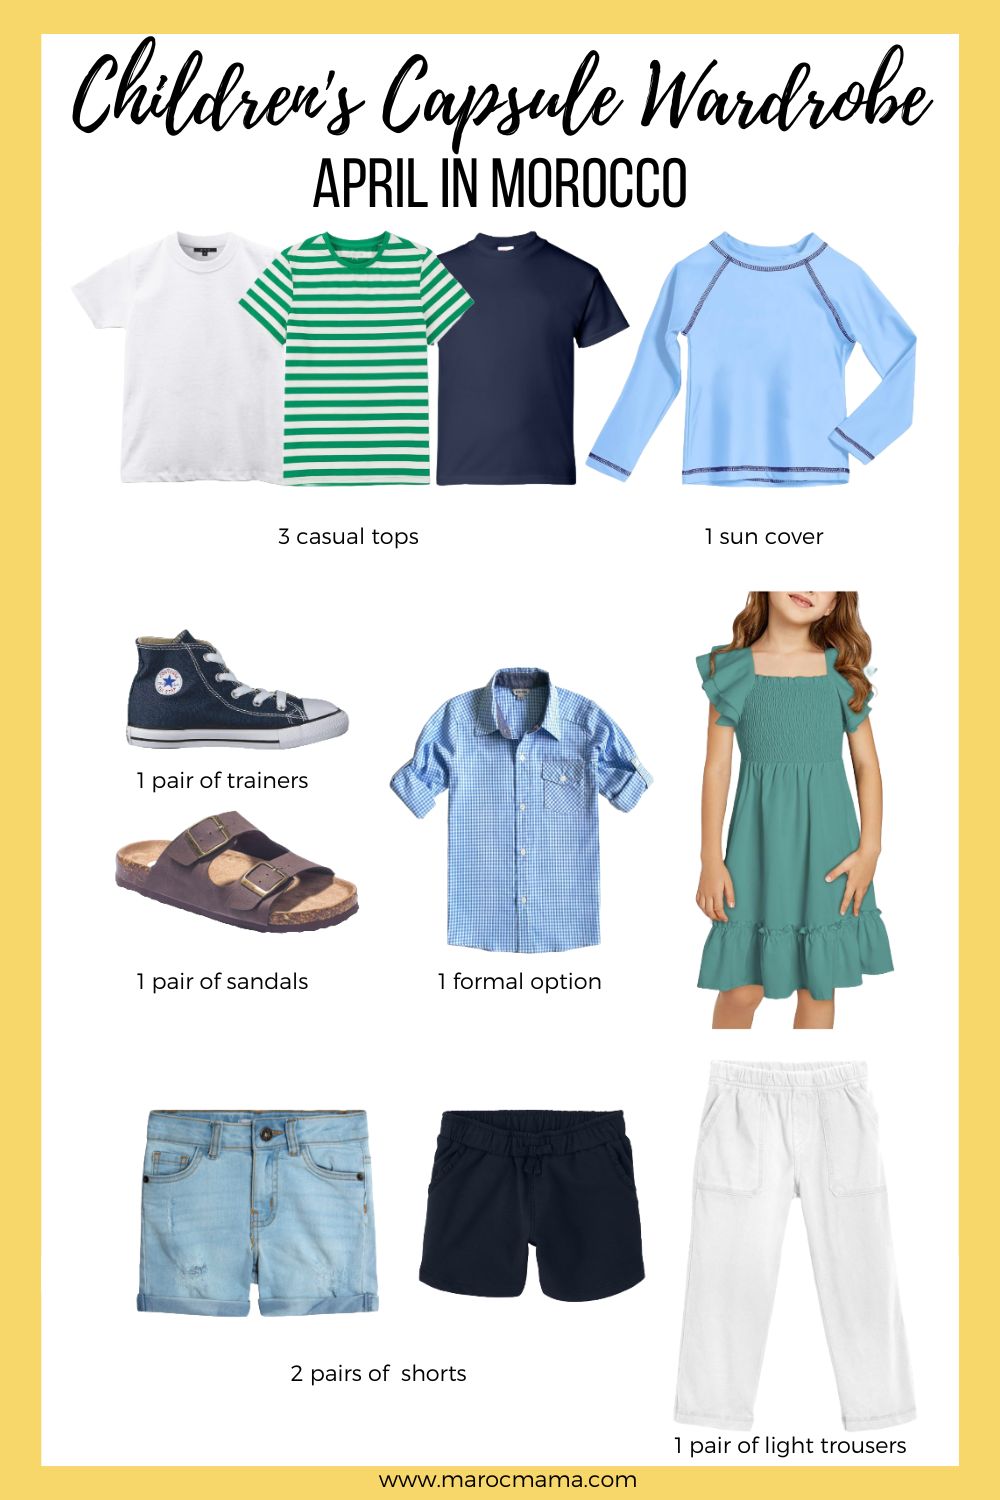 3 casual t-shirts 1 formal top1 pair of light trousers2 other bottoms (skirts/shorts) 1 linen shirt/sun cover to shade you from the sun 1 pair of trainers 1 pair of sandals with the text Children's Capsule Wardrobe, April in Morocco